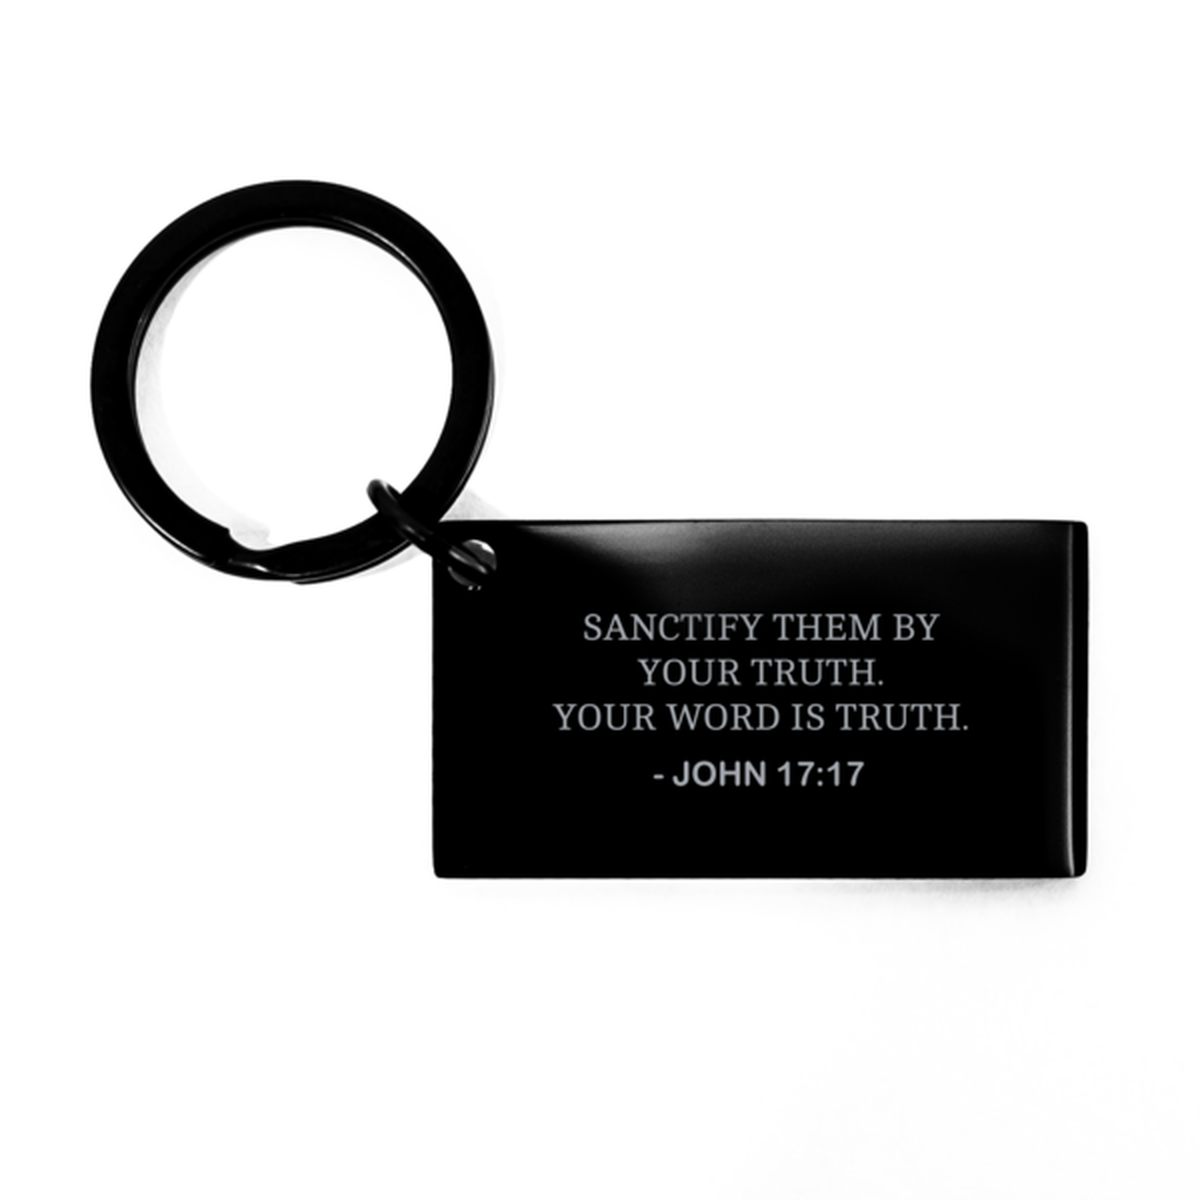 Bible Verse Black Keychain, John 17:17 Sanctify Them By Your Truth. Your Word Is, Christian Inspirational Key Ring Gifts For Men Women